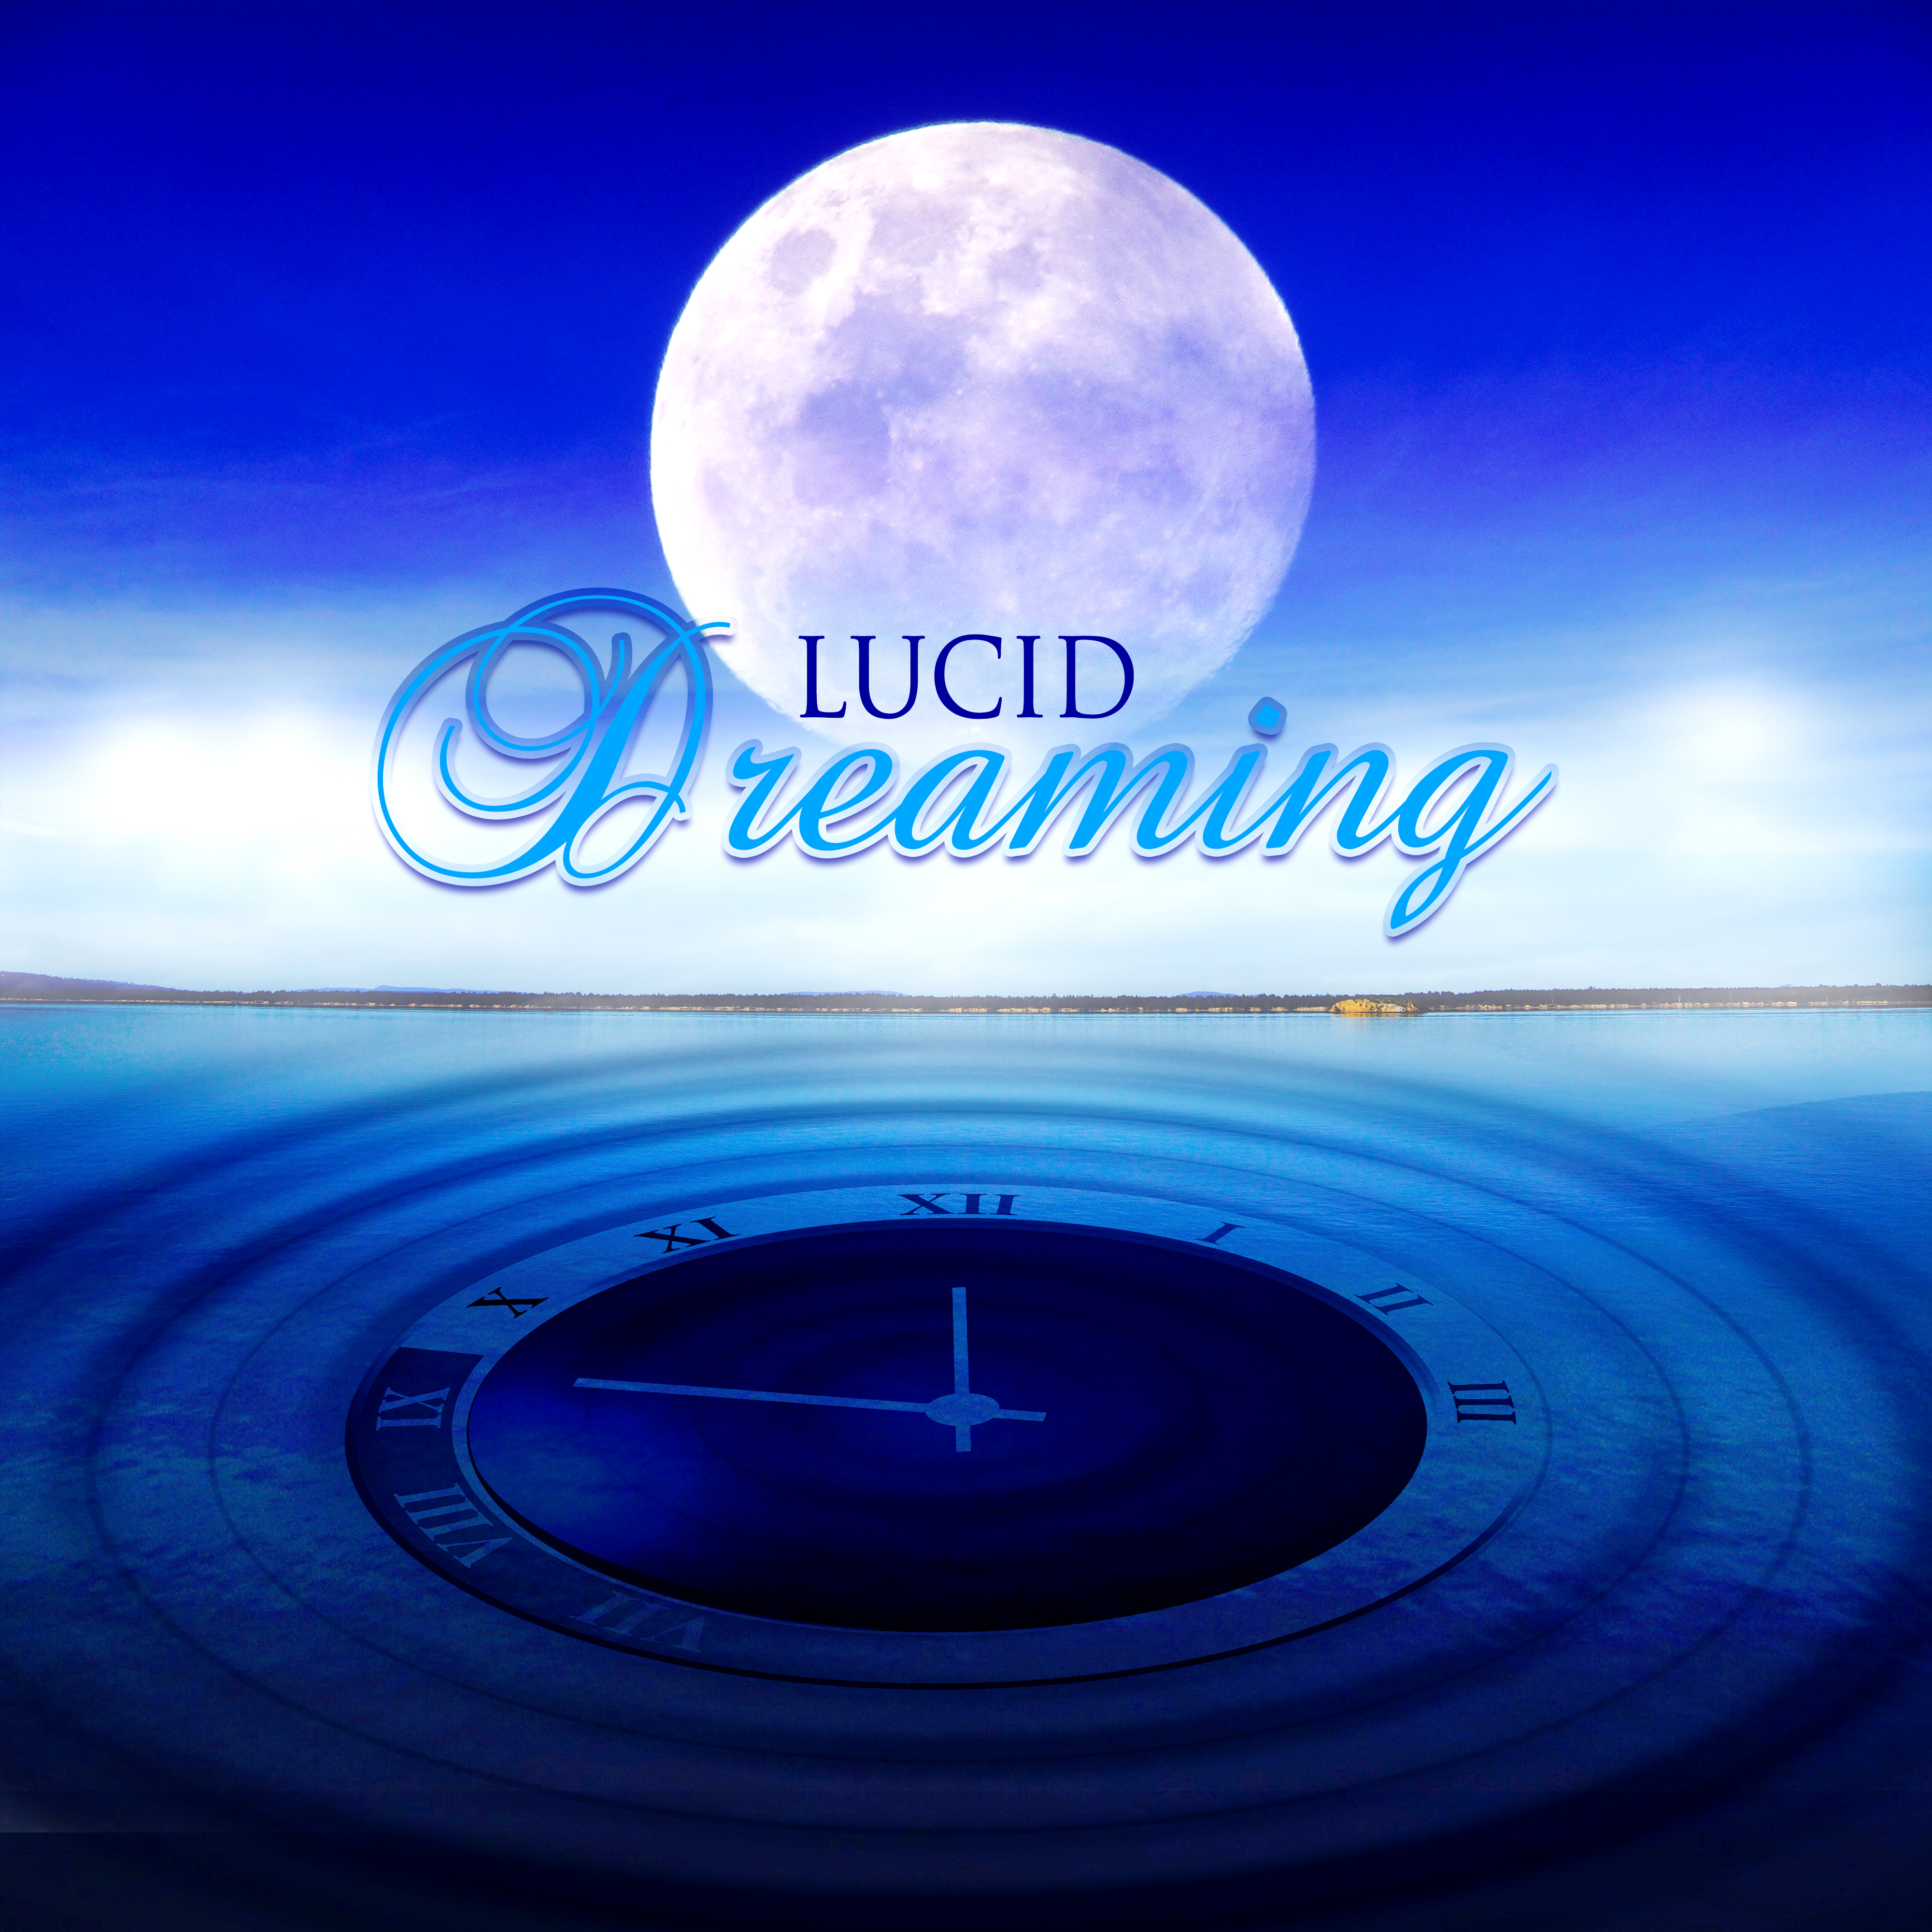 Lucid Dreaming - Gentle Music for Restful Sleep,  Soothing Sleep Music, Soft Sounds of Nature for Sleeping Soundly, Relaxing Background Music, Calming Music